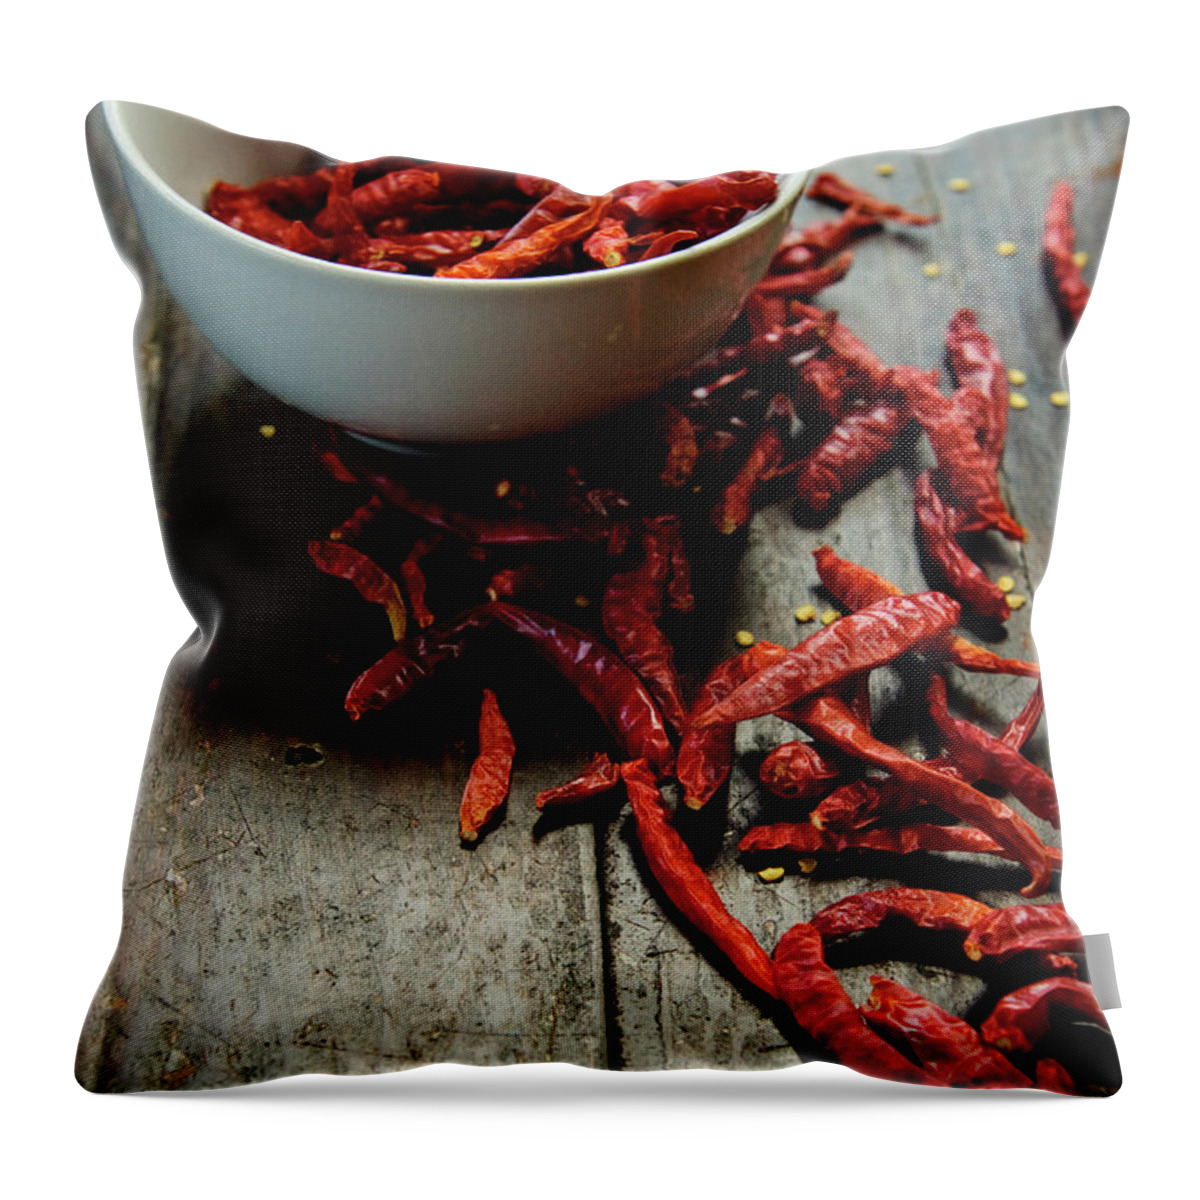 Wood Throw Pillow featuring the photograph Dried Chilies In White Bowl by Lina Aidukaite